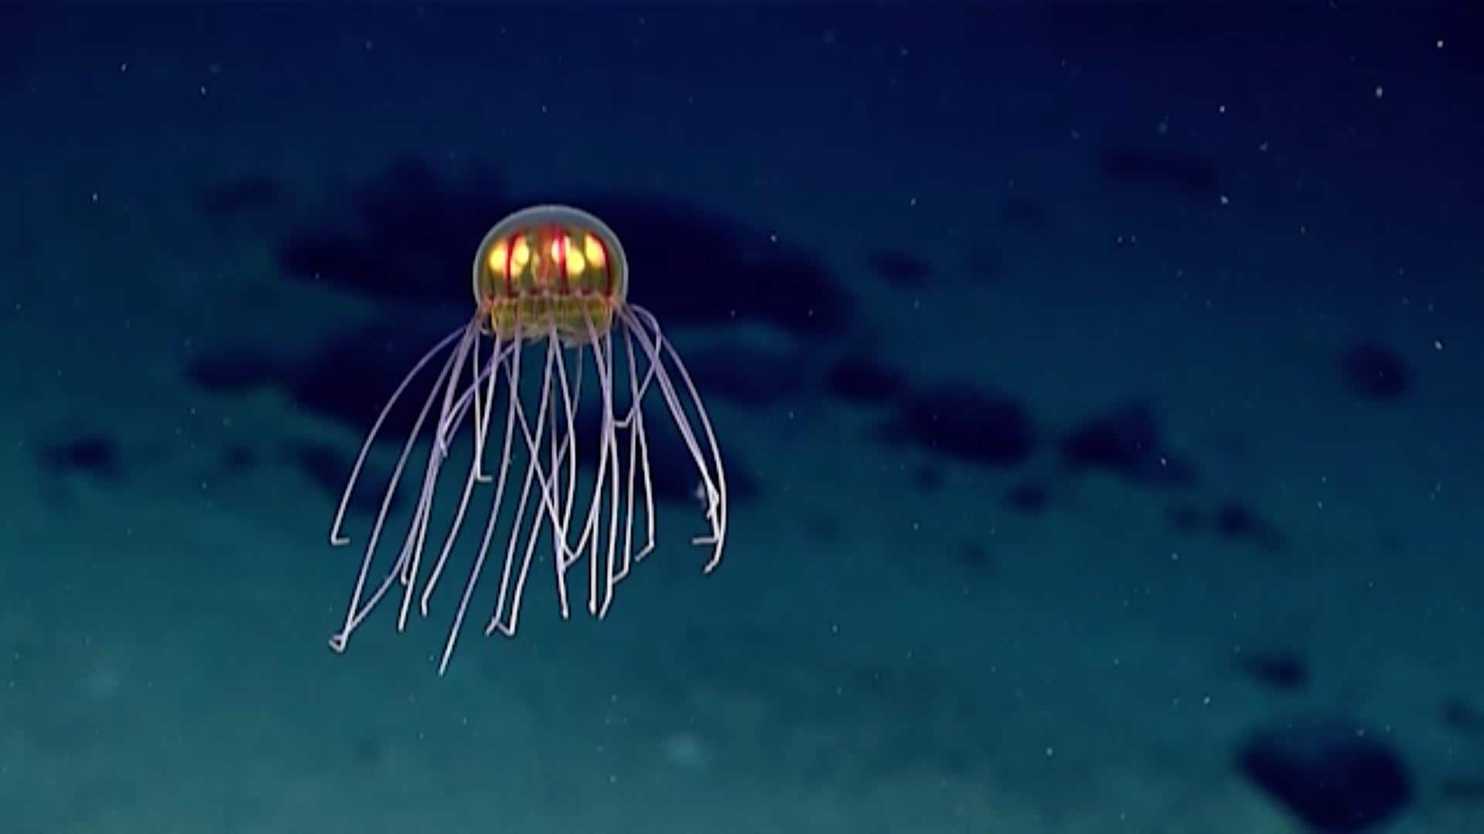 What do jellyfish look like?